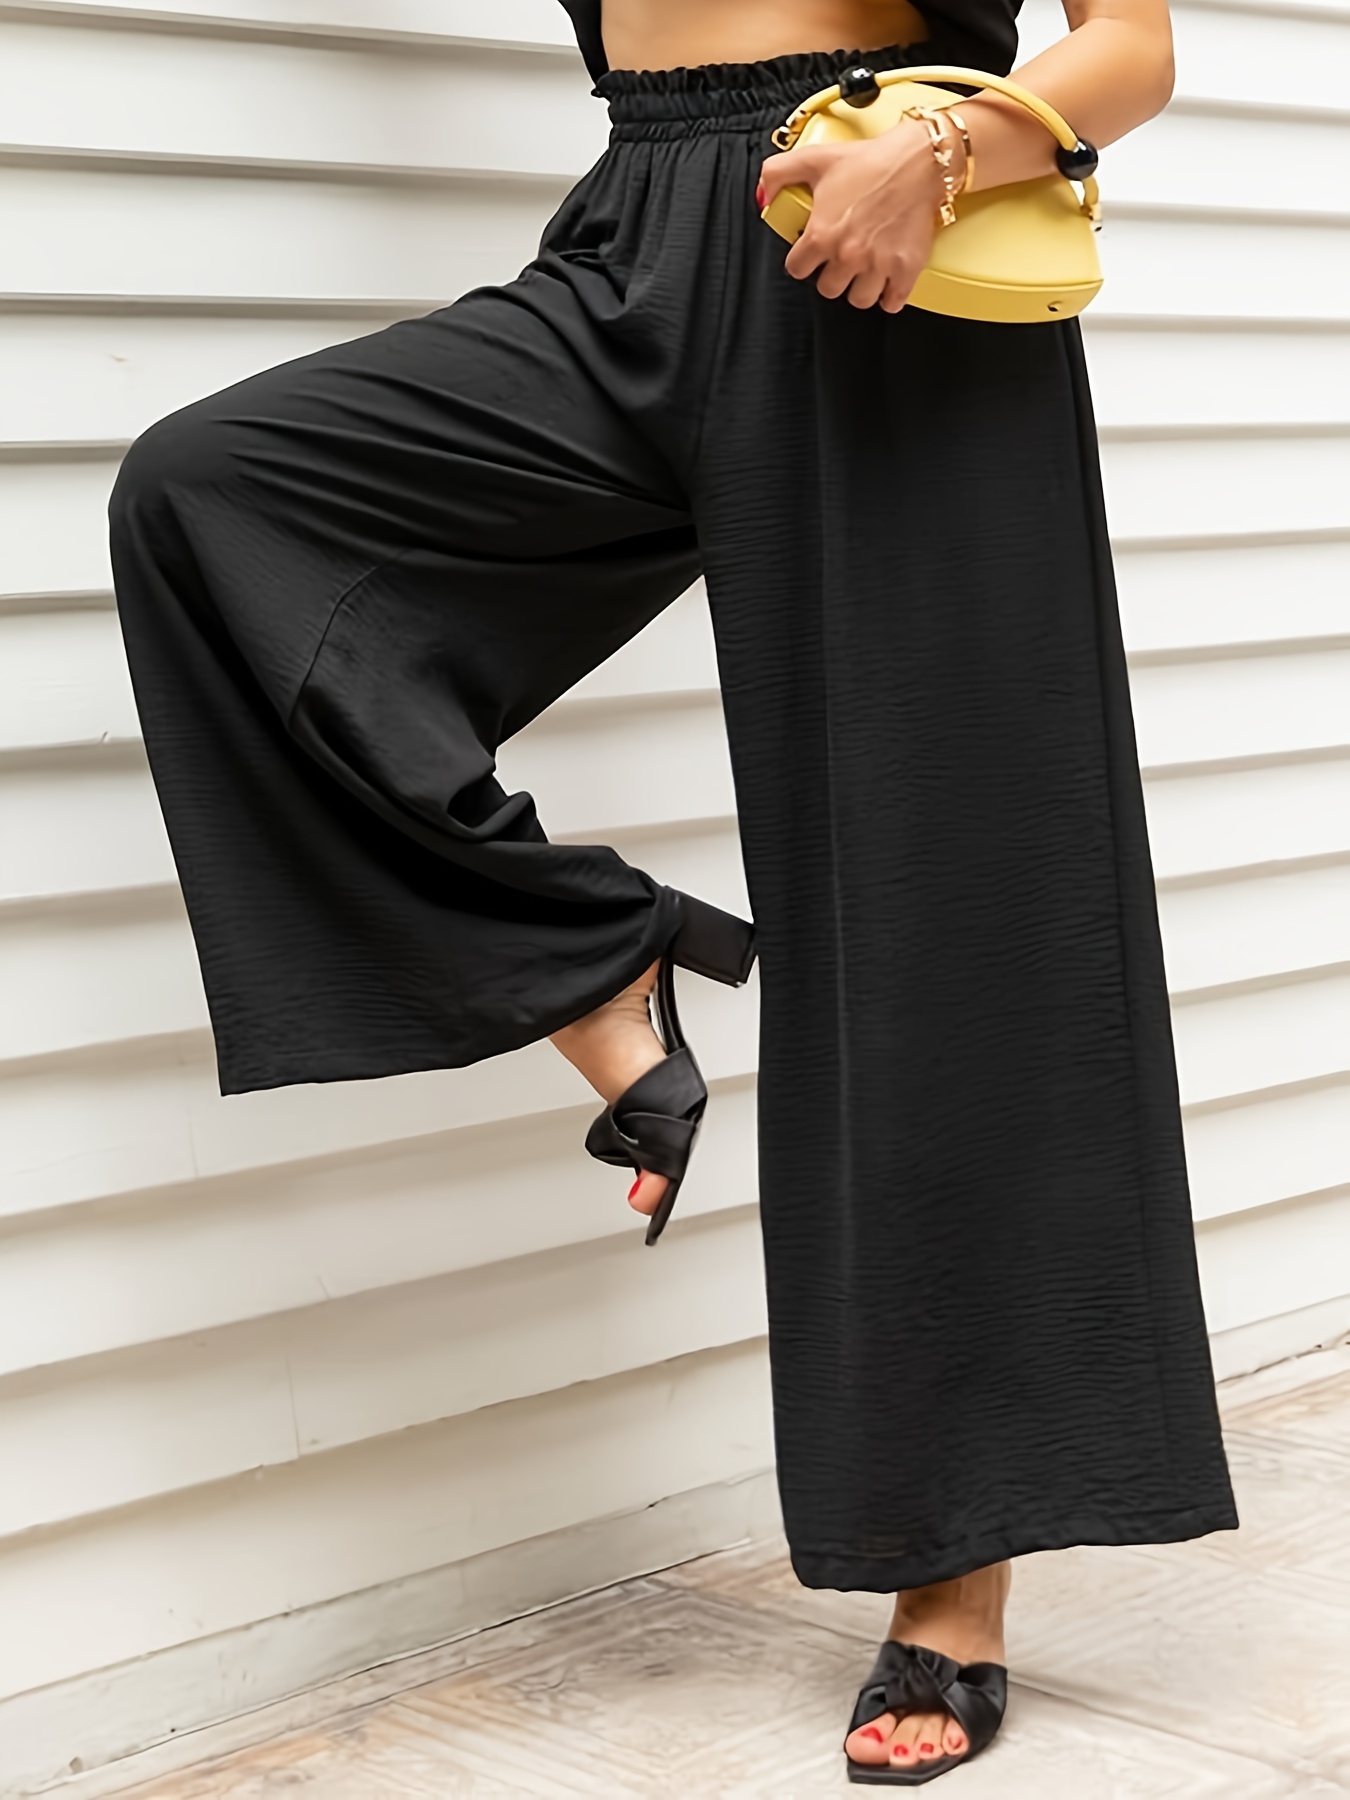 Women's Casual Palazzo High Waisted Flowy Wide Leg Pants Summer